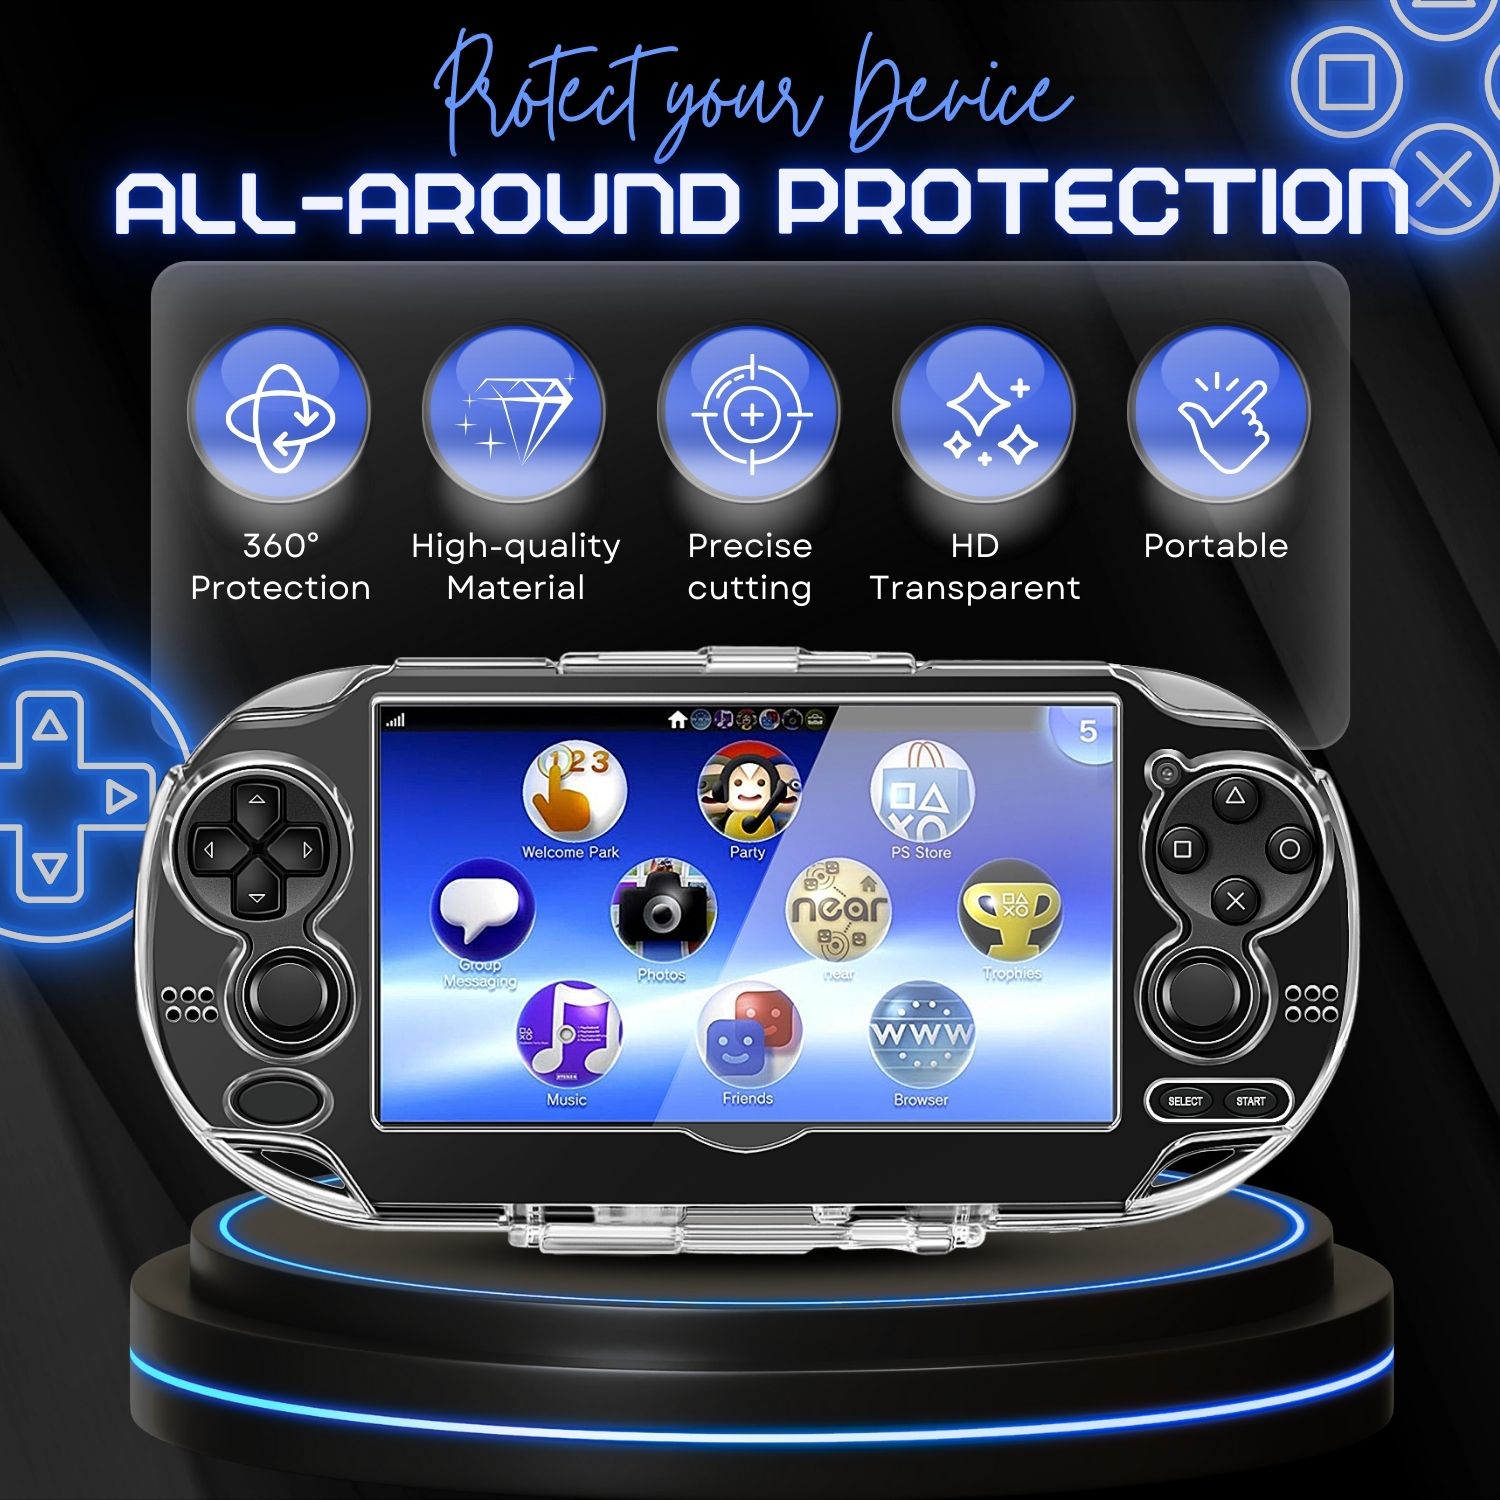 All-Around Defense: Our crystal clear hard case for PS Vita 1000, also known as PSV 1000 and PCH 1000, offers a full cover design for all-around external surface protection, ensuring your device is shielded from scratches, dust, and minor impacts. Not Compatible with PS Vita 2000